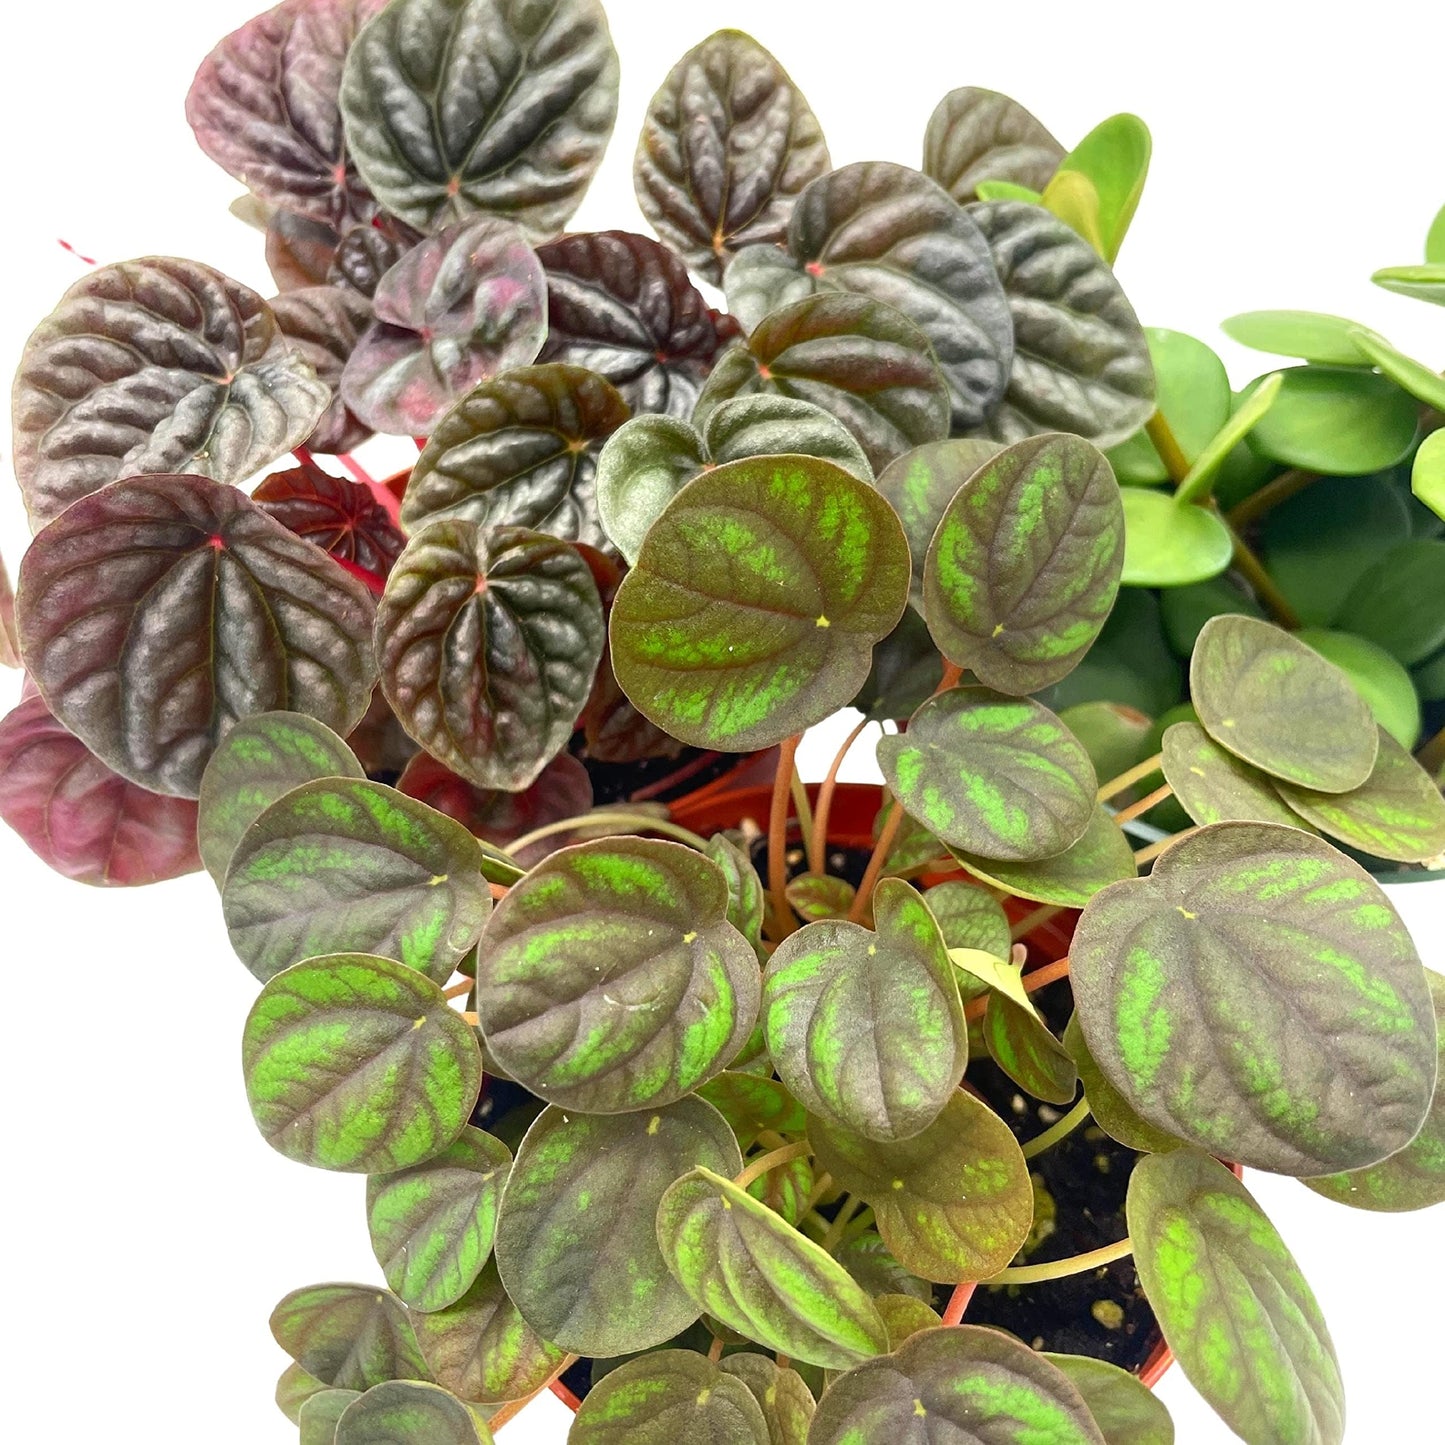 Peperomia Assortment Set, 4 inch pots, Set of 3, Watermelon, Marble, Ripple, Rosso, peppermill, Quito, Variety Assorted Collection